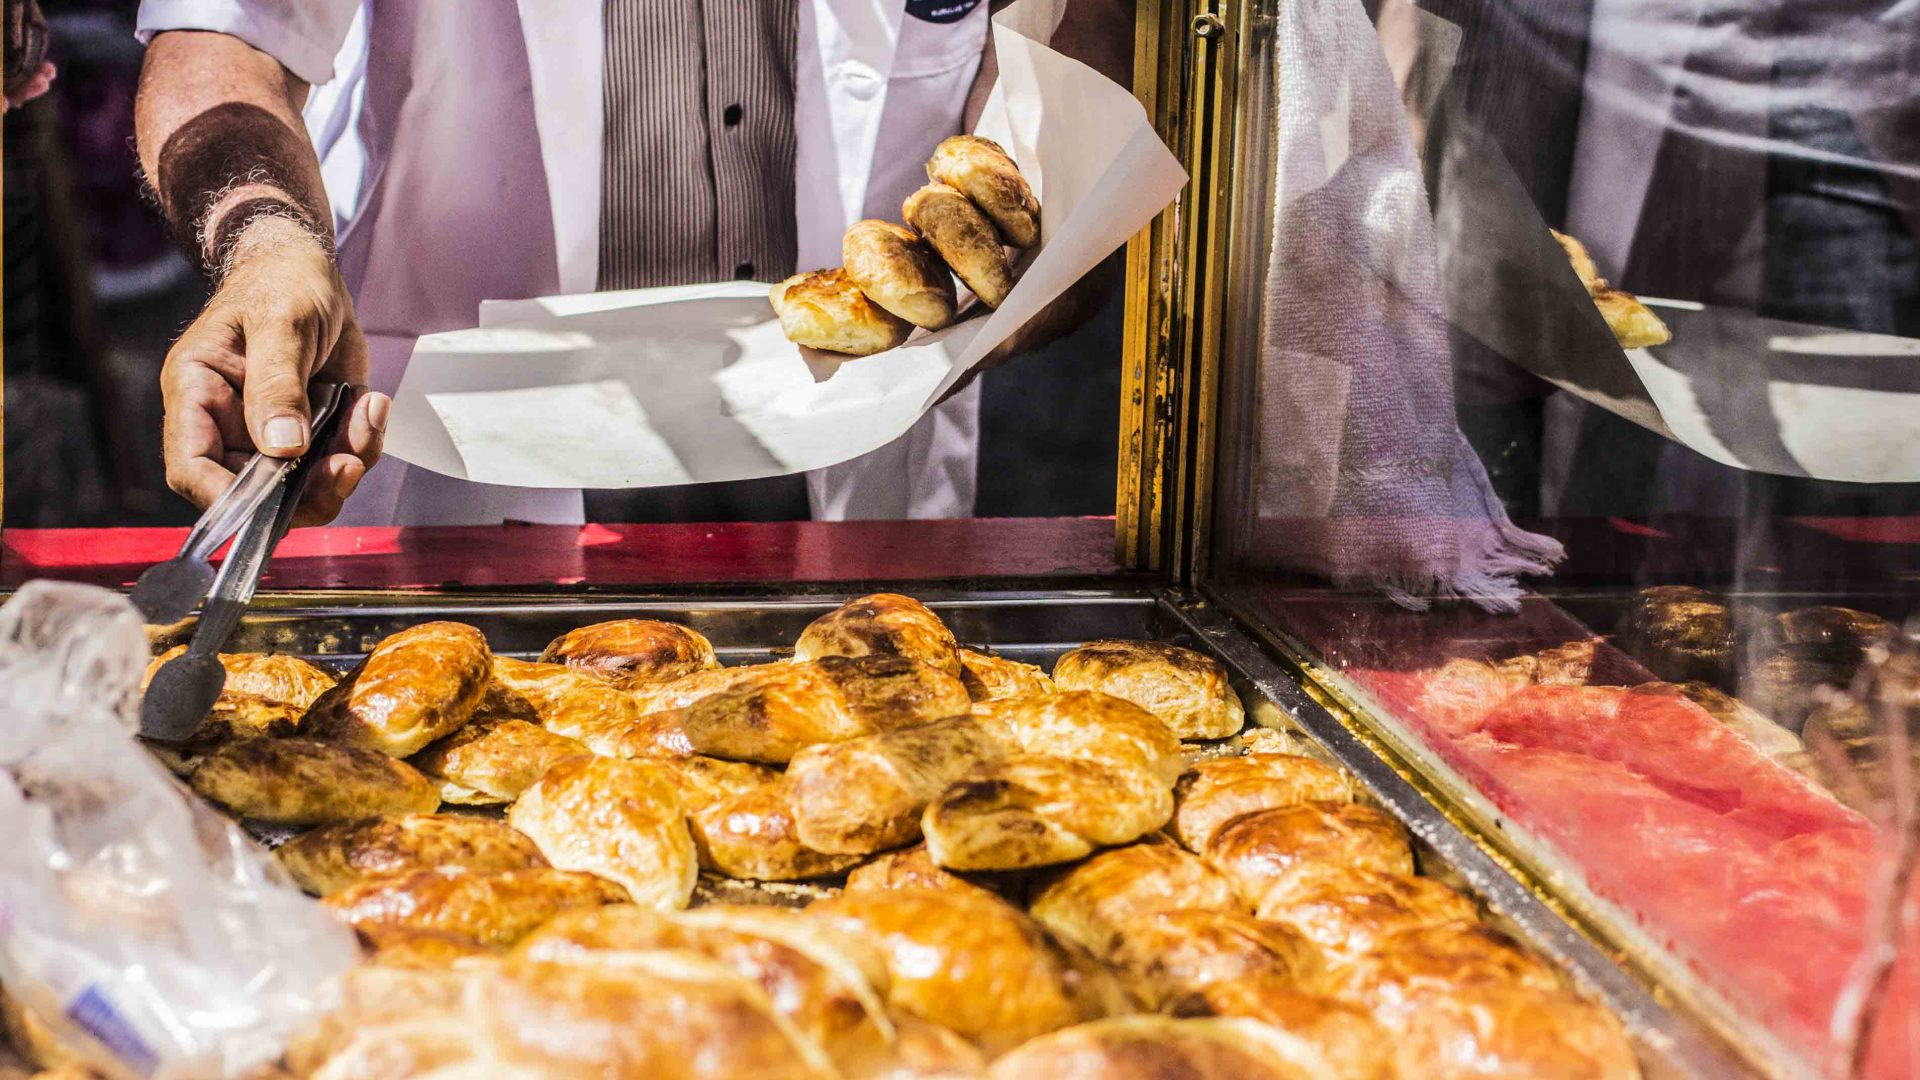 A street vendor sells Turkish pastries in Istanbul.